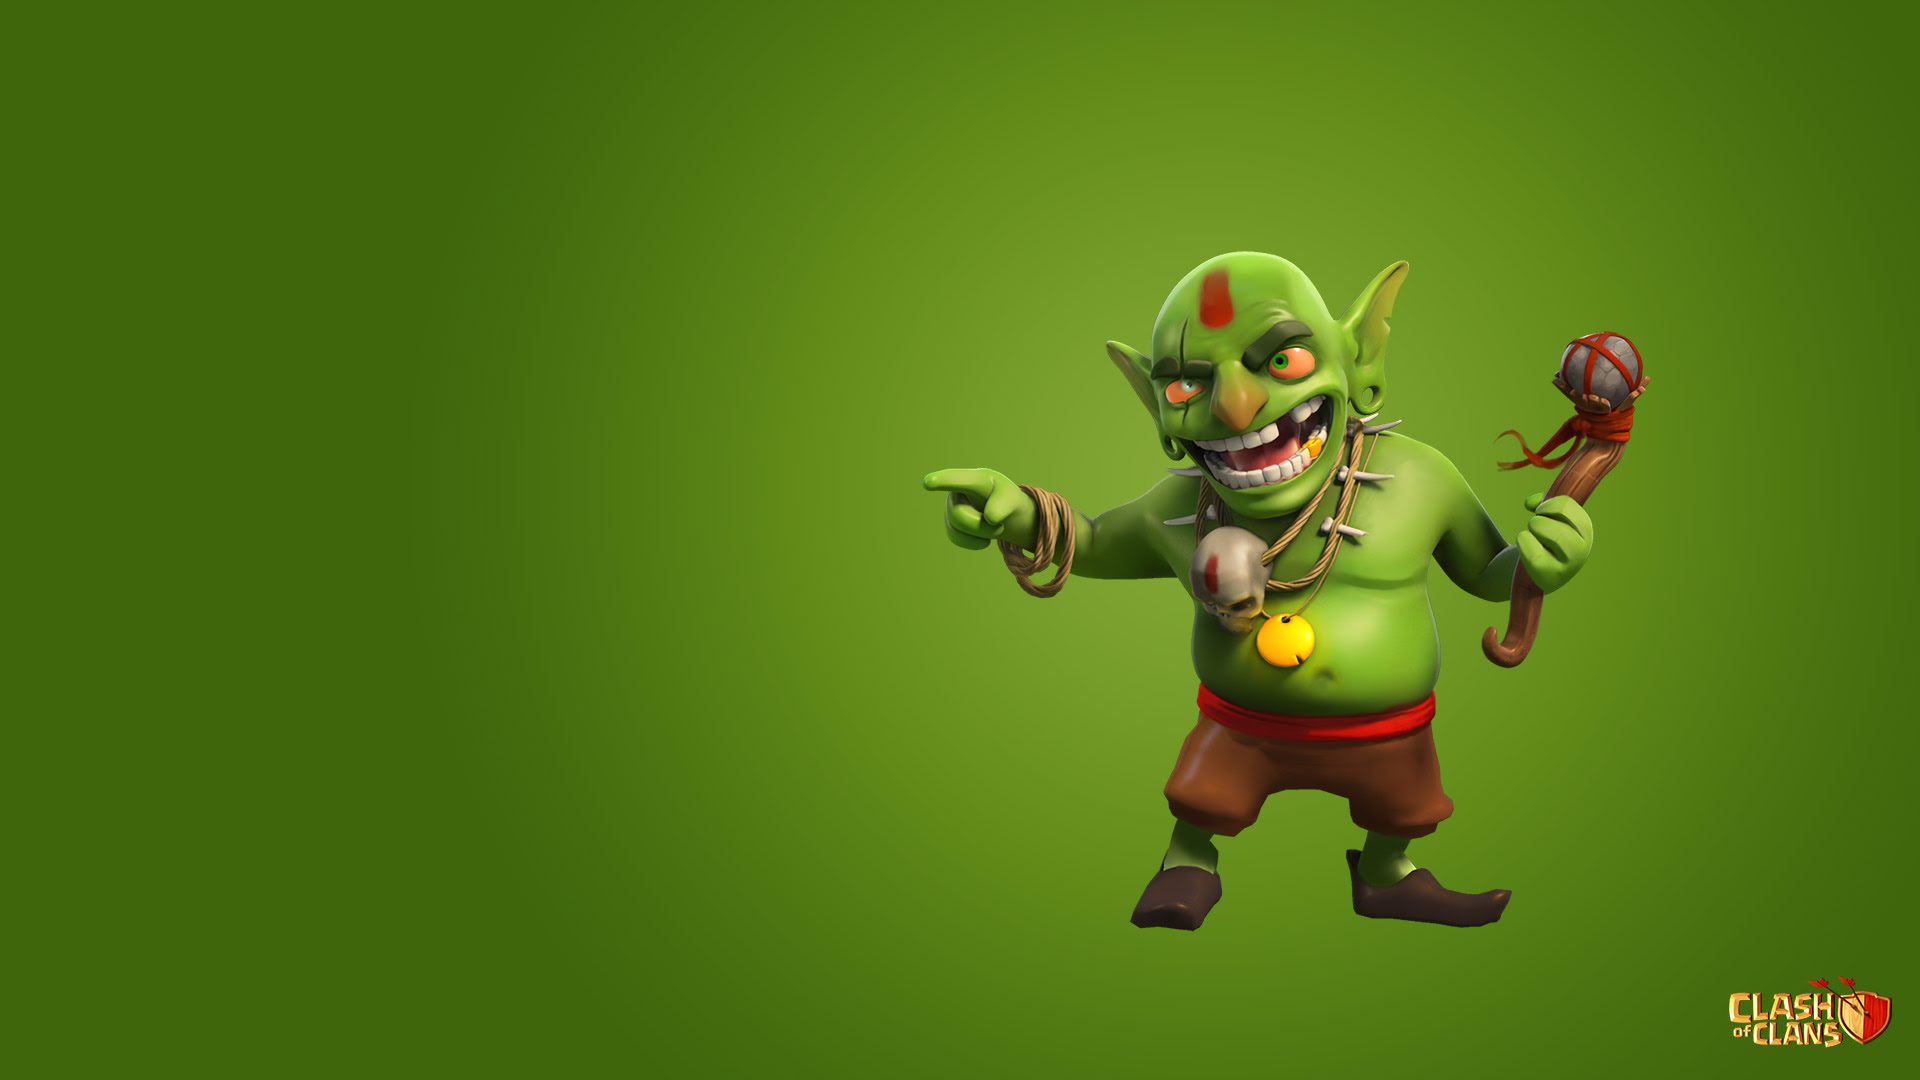 Video Game Clash of Clans HD Wallpaper